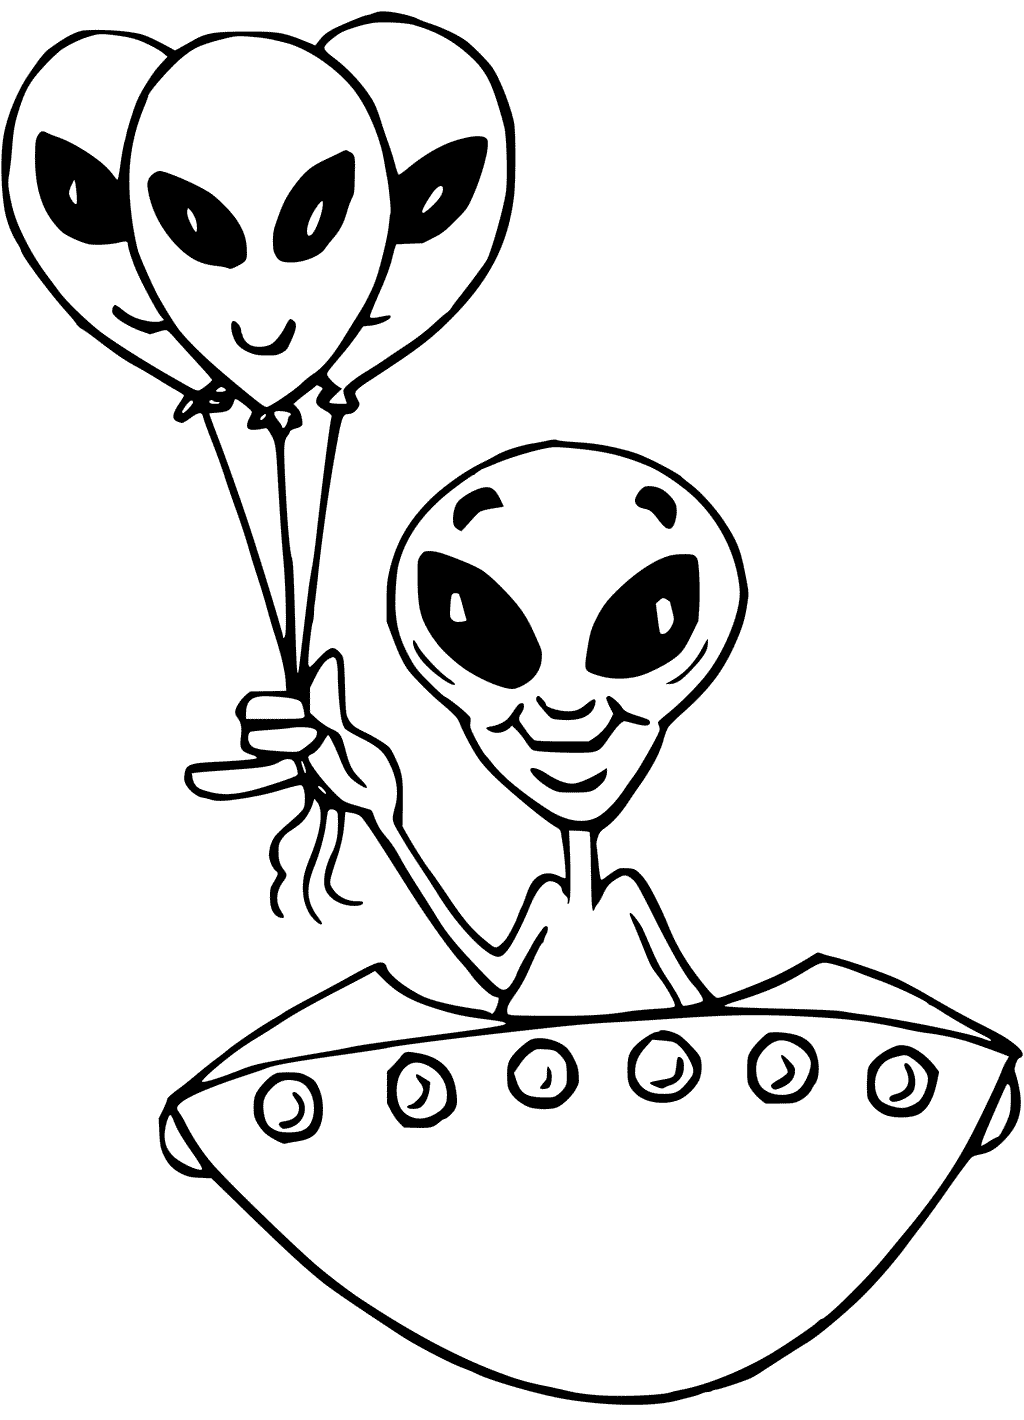 Coloring Page of Funny Alien